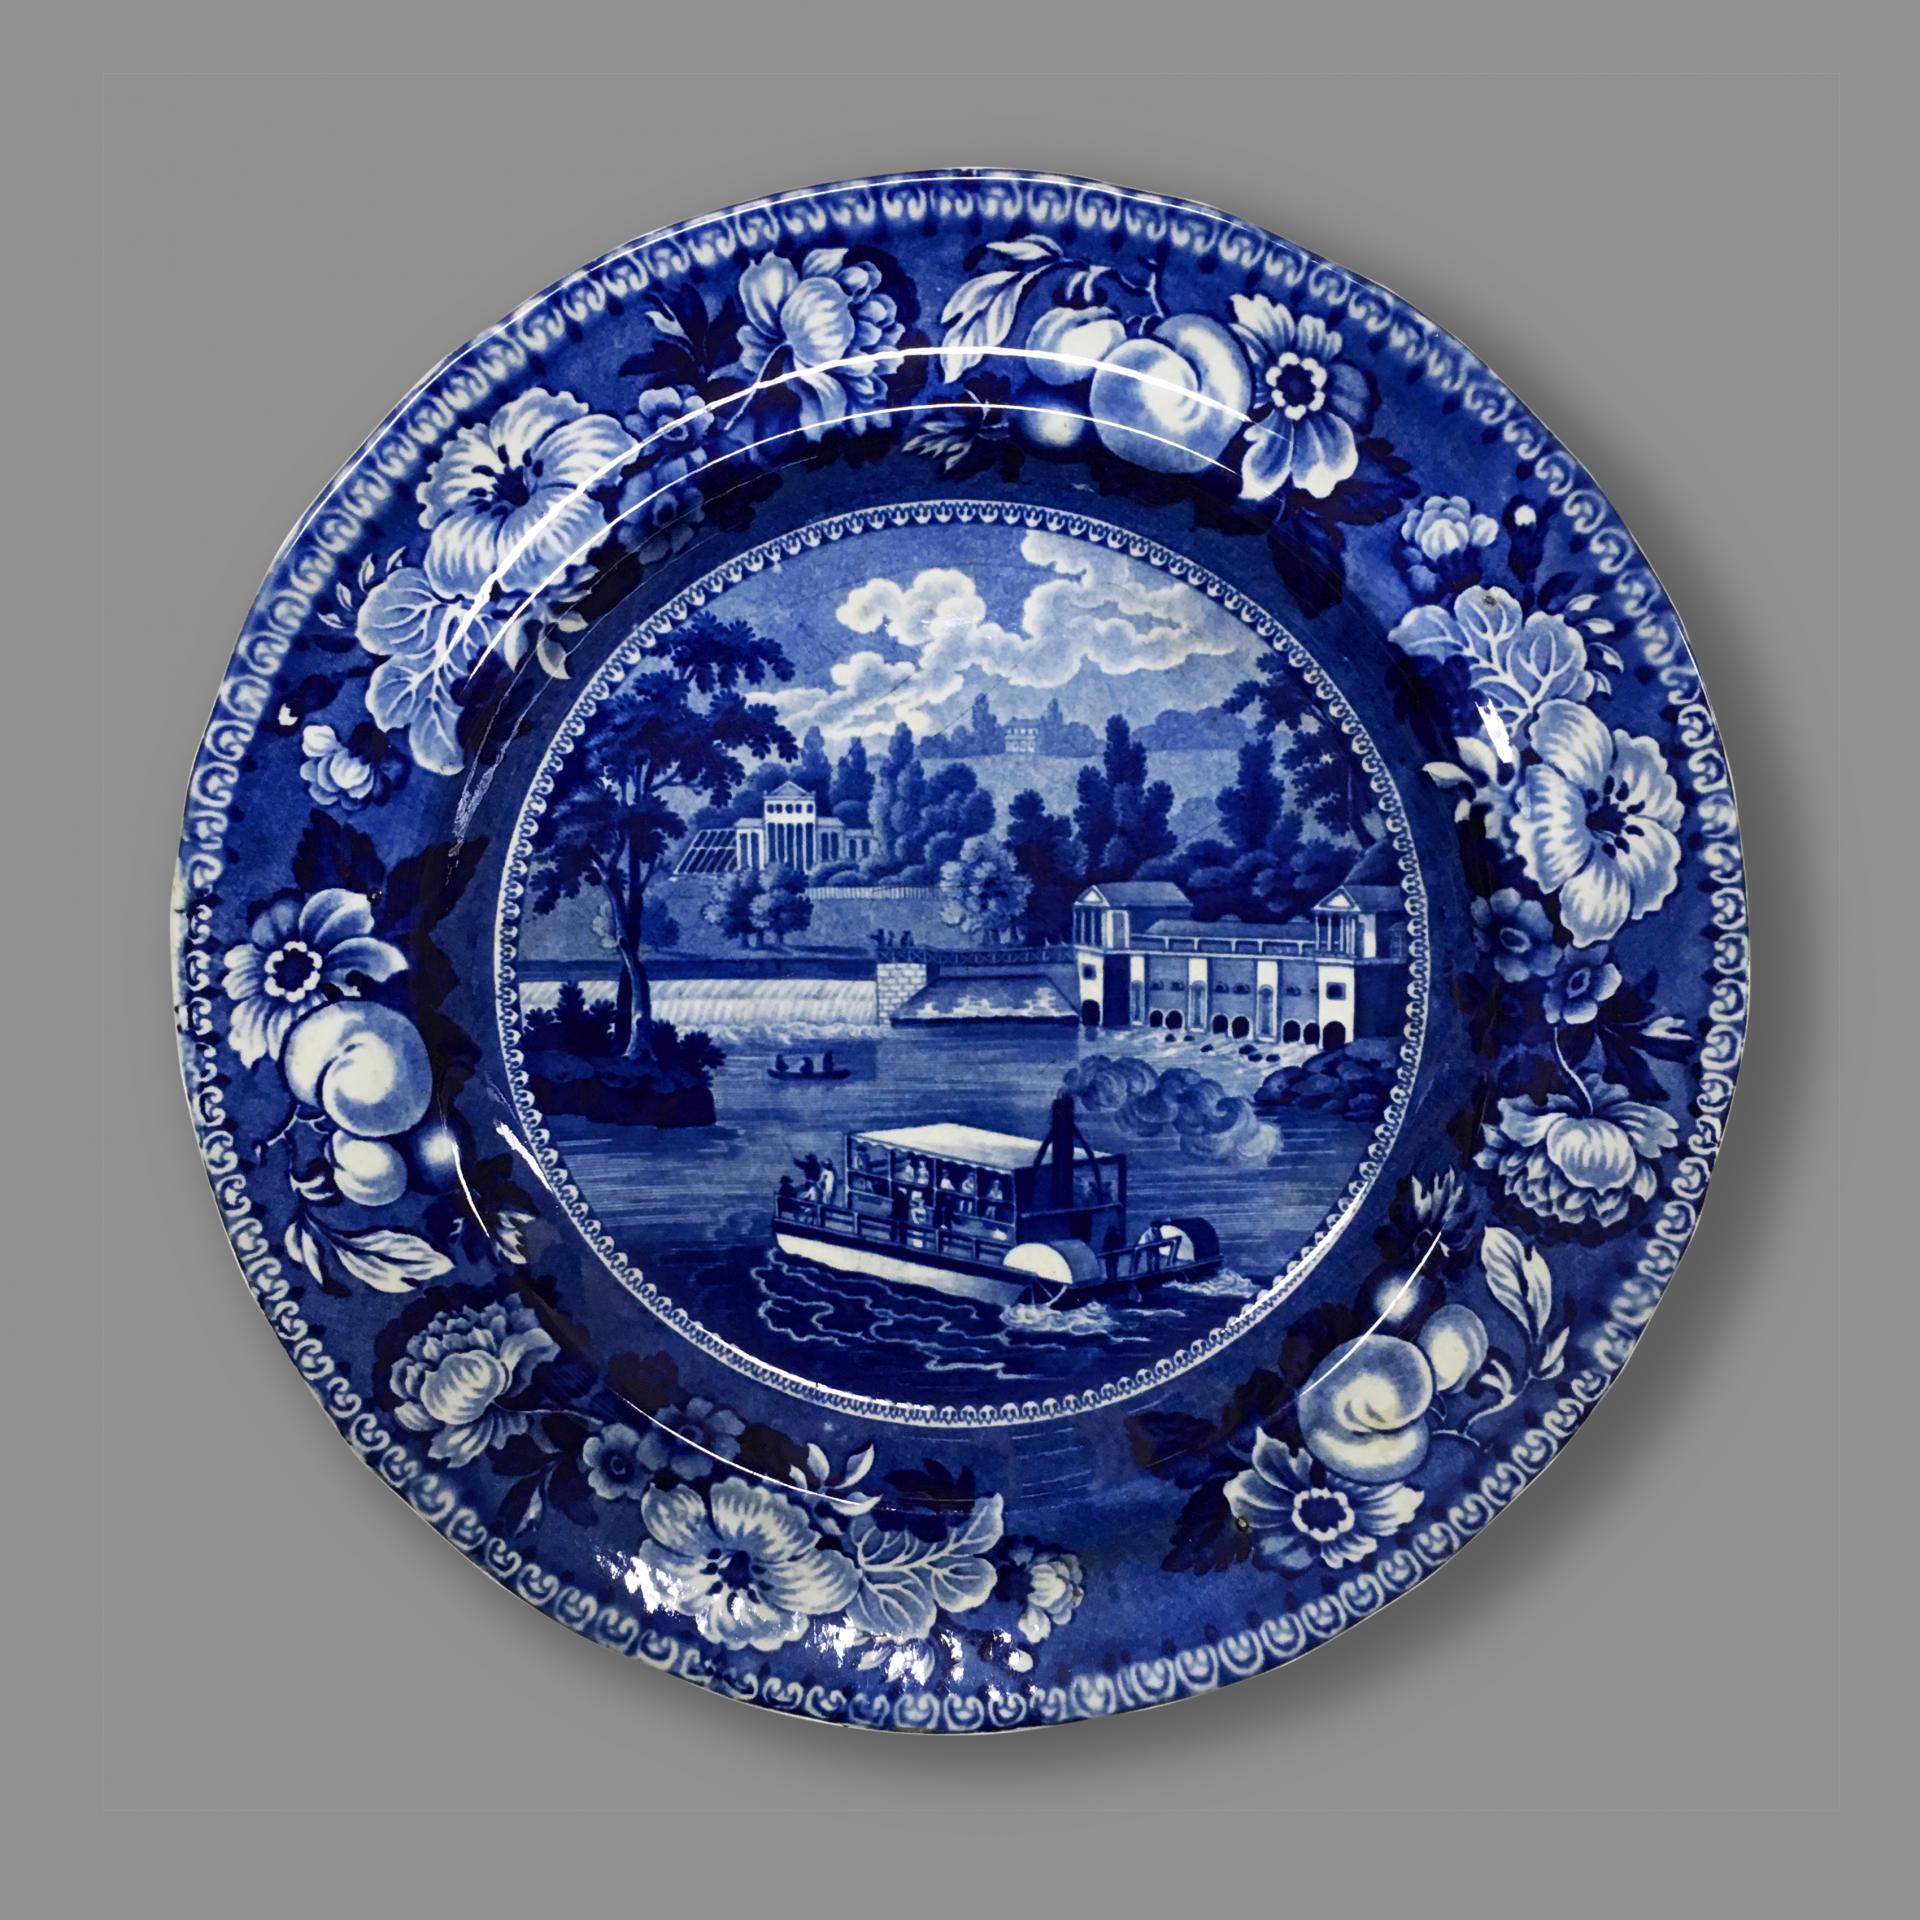 blue and white transferware plate depicting a scene showing the Philadelphia water works